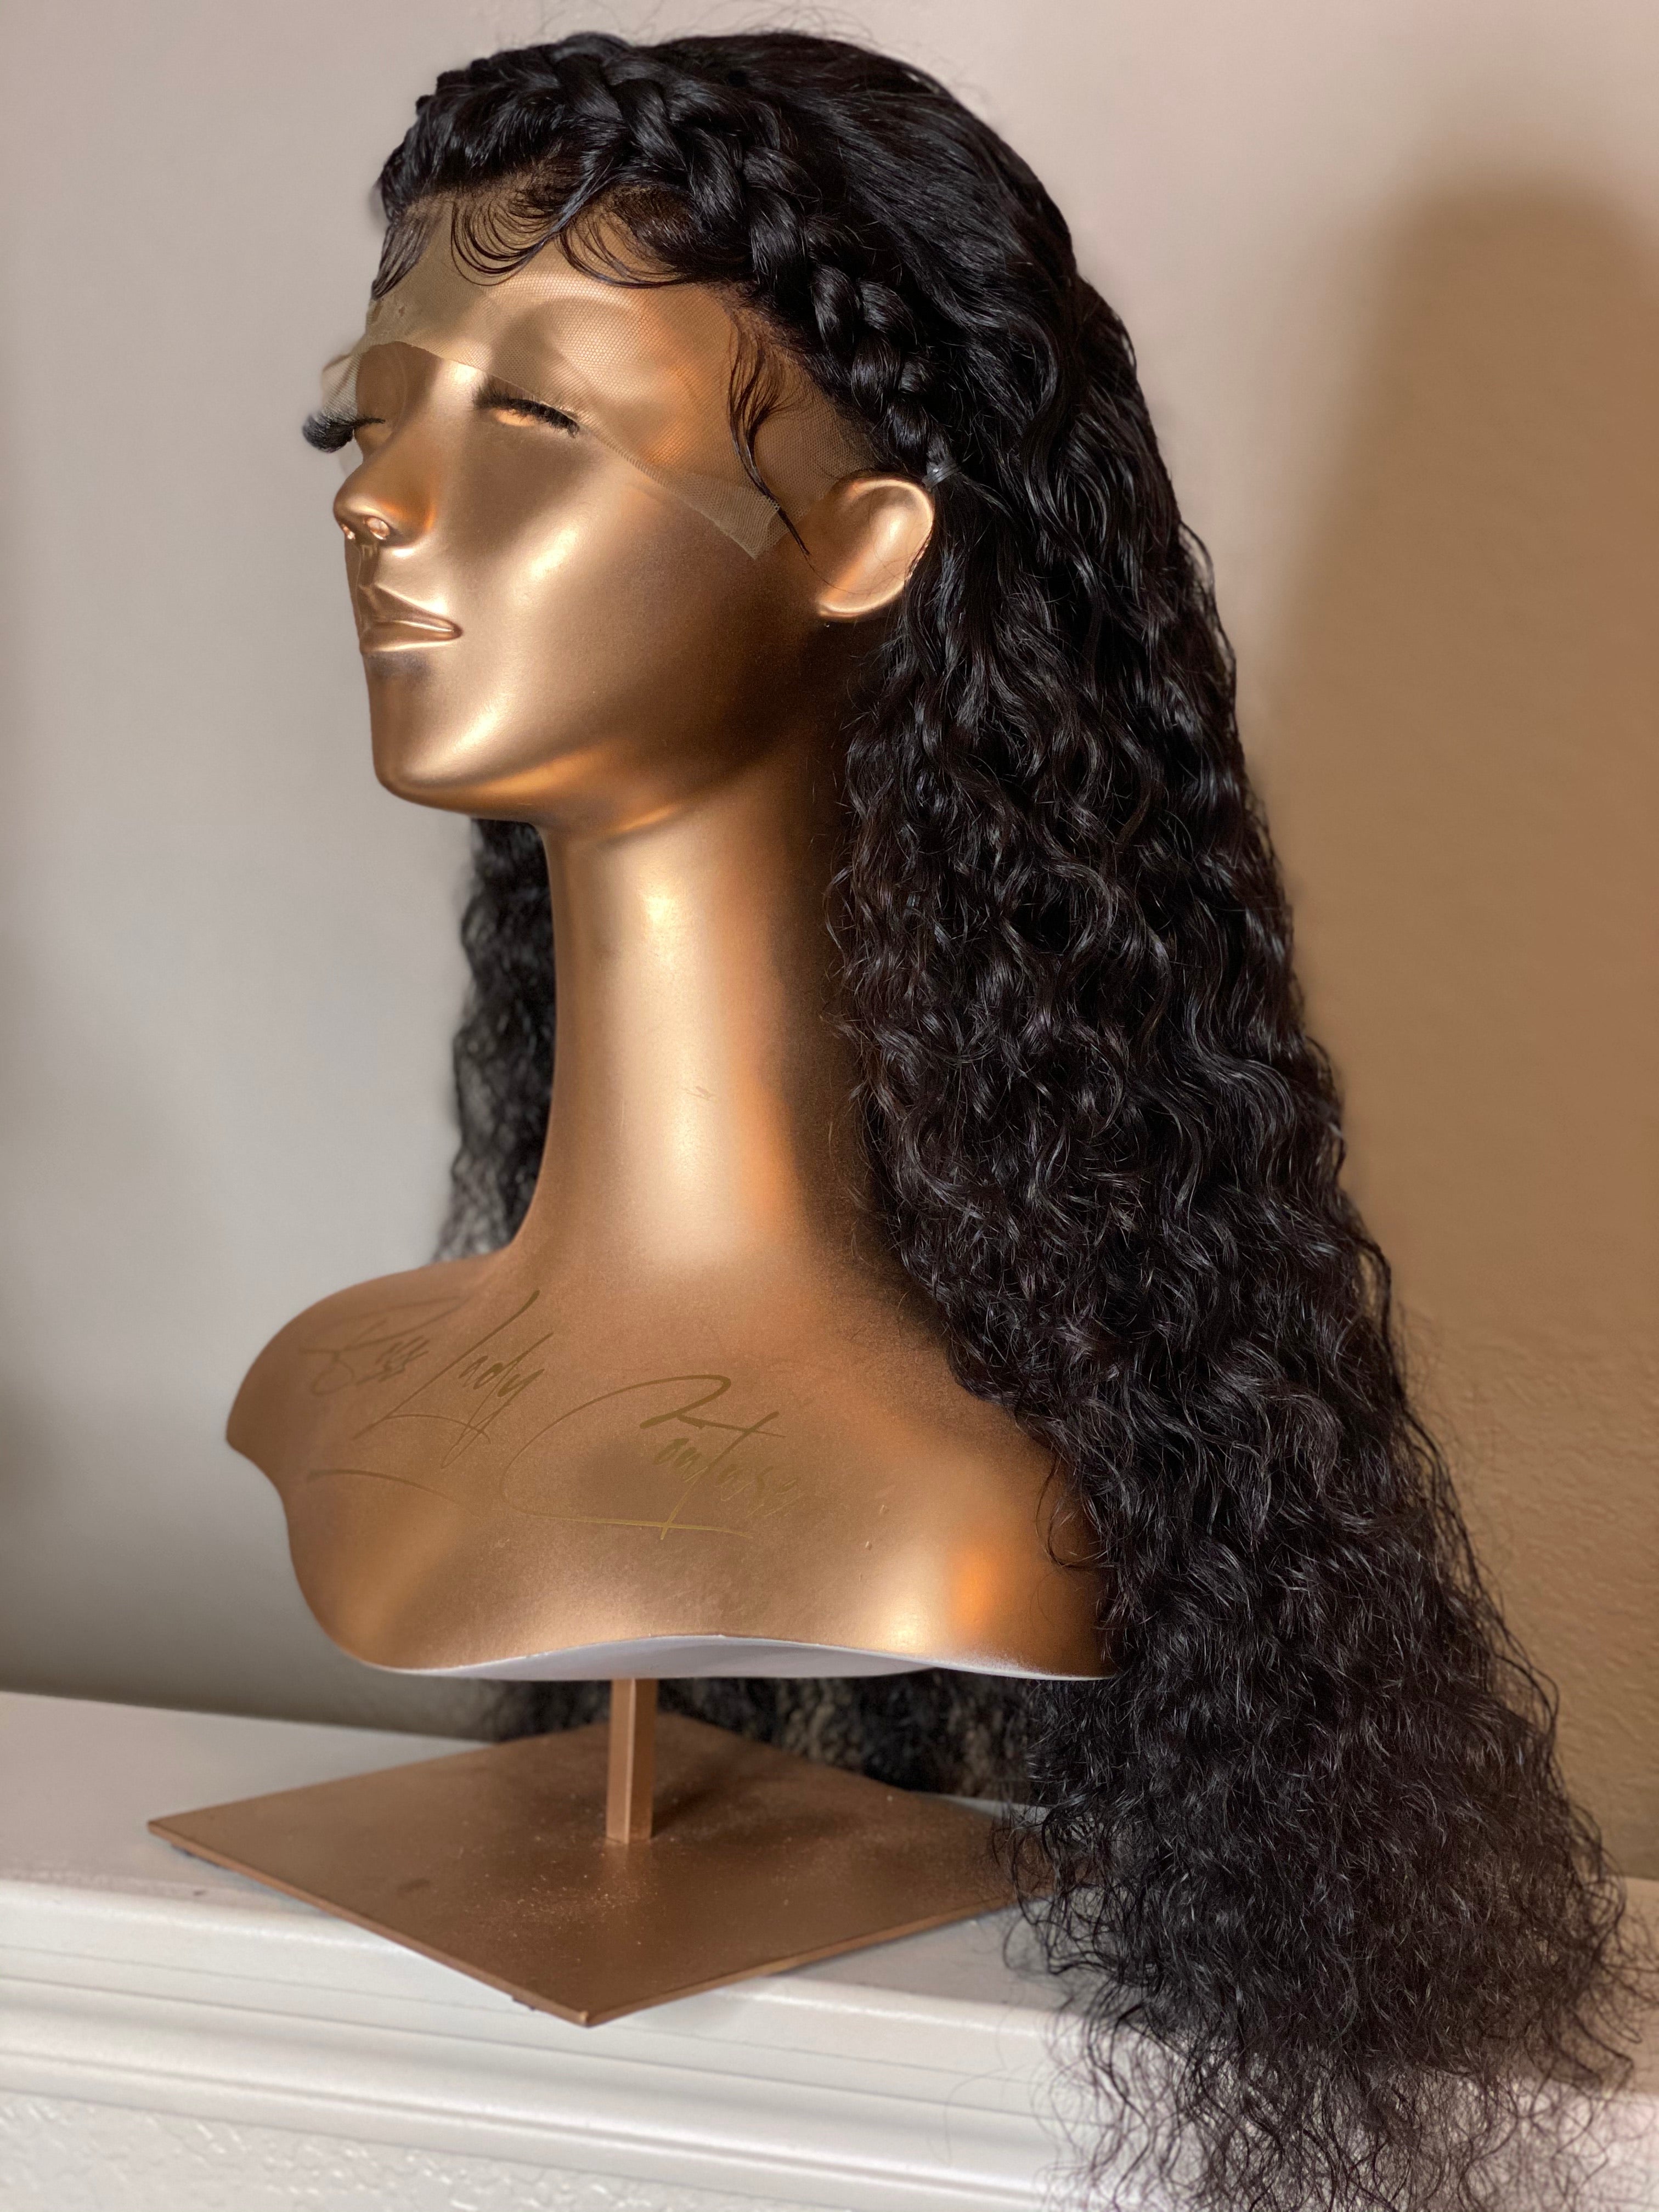 CUSTOM HAND STITCHED LACE FRONT CURLY WIG